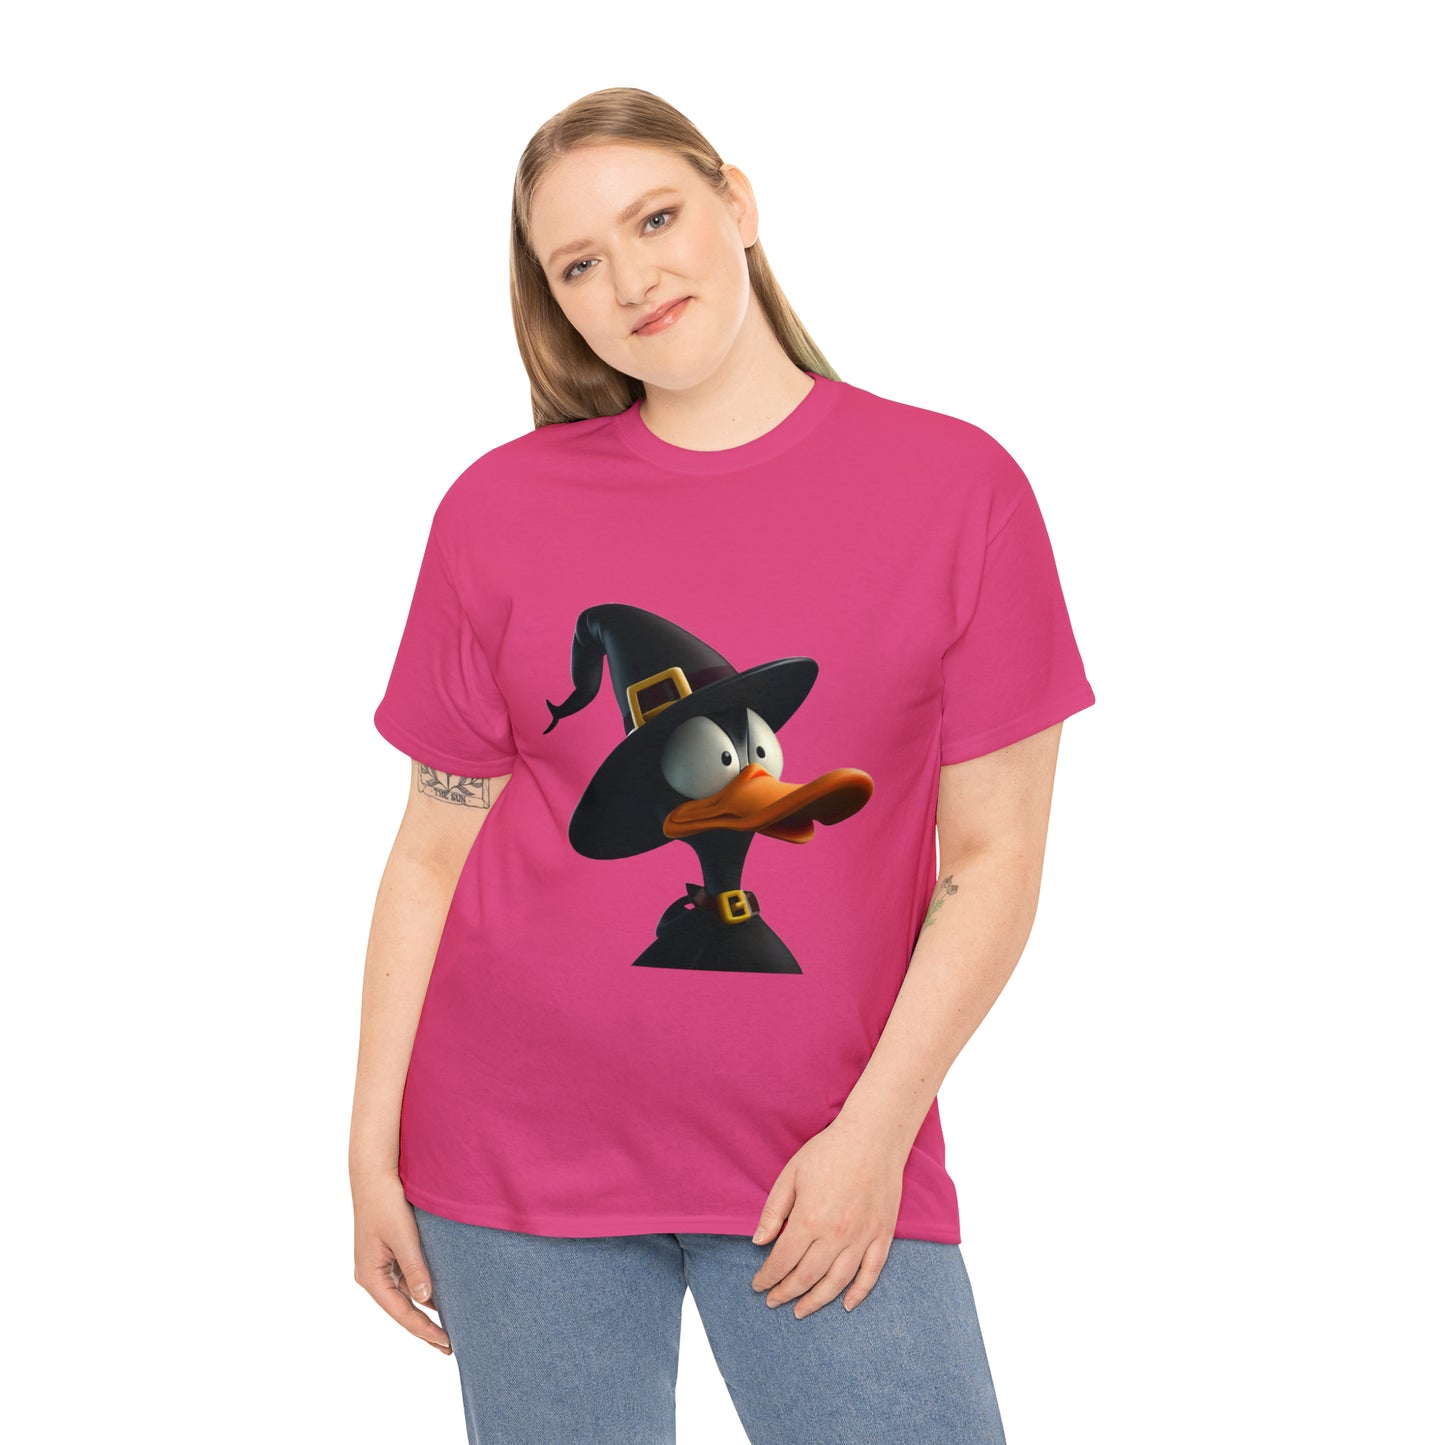 Witchy Daffy Duck Tee